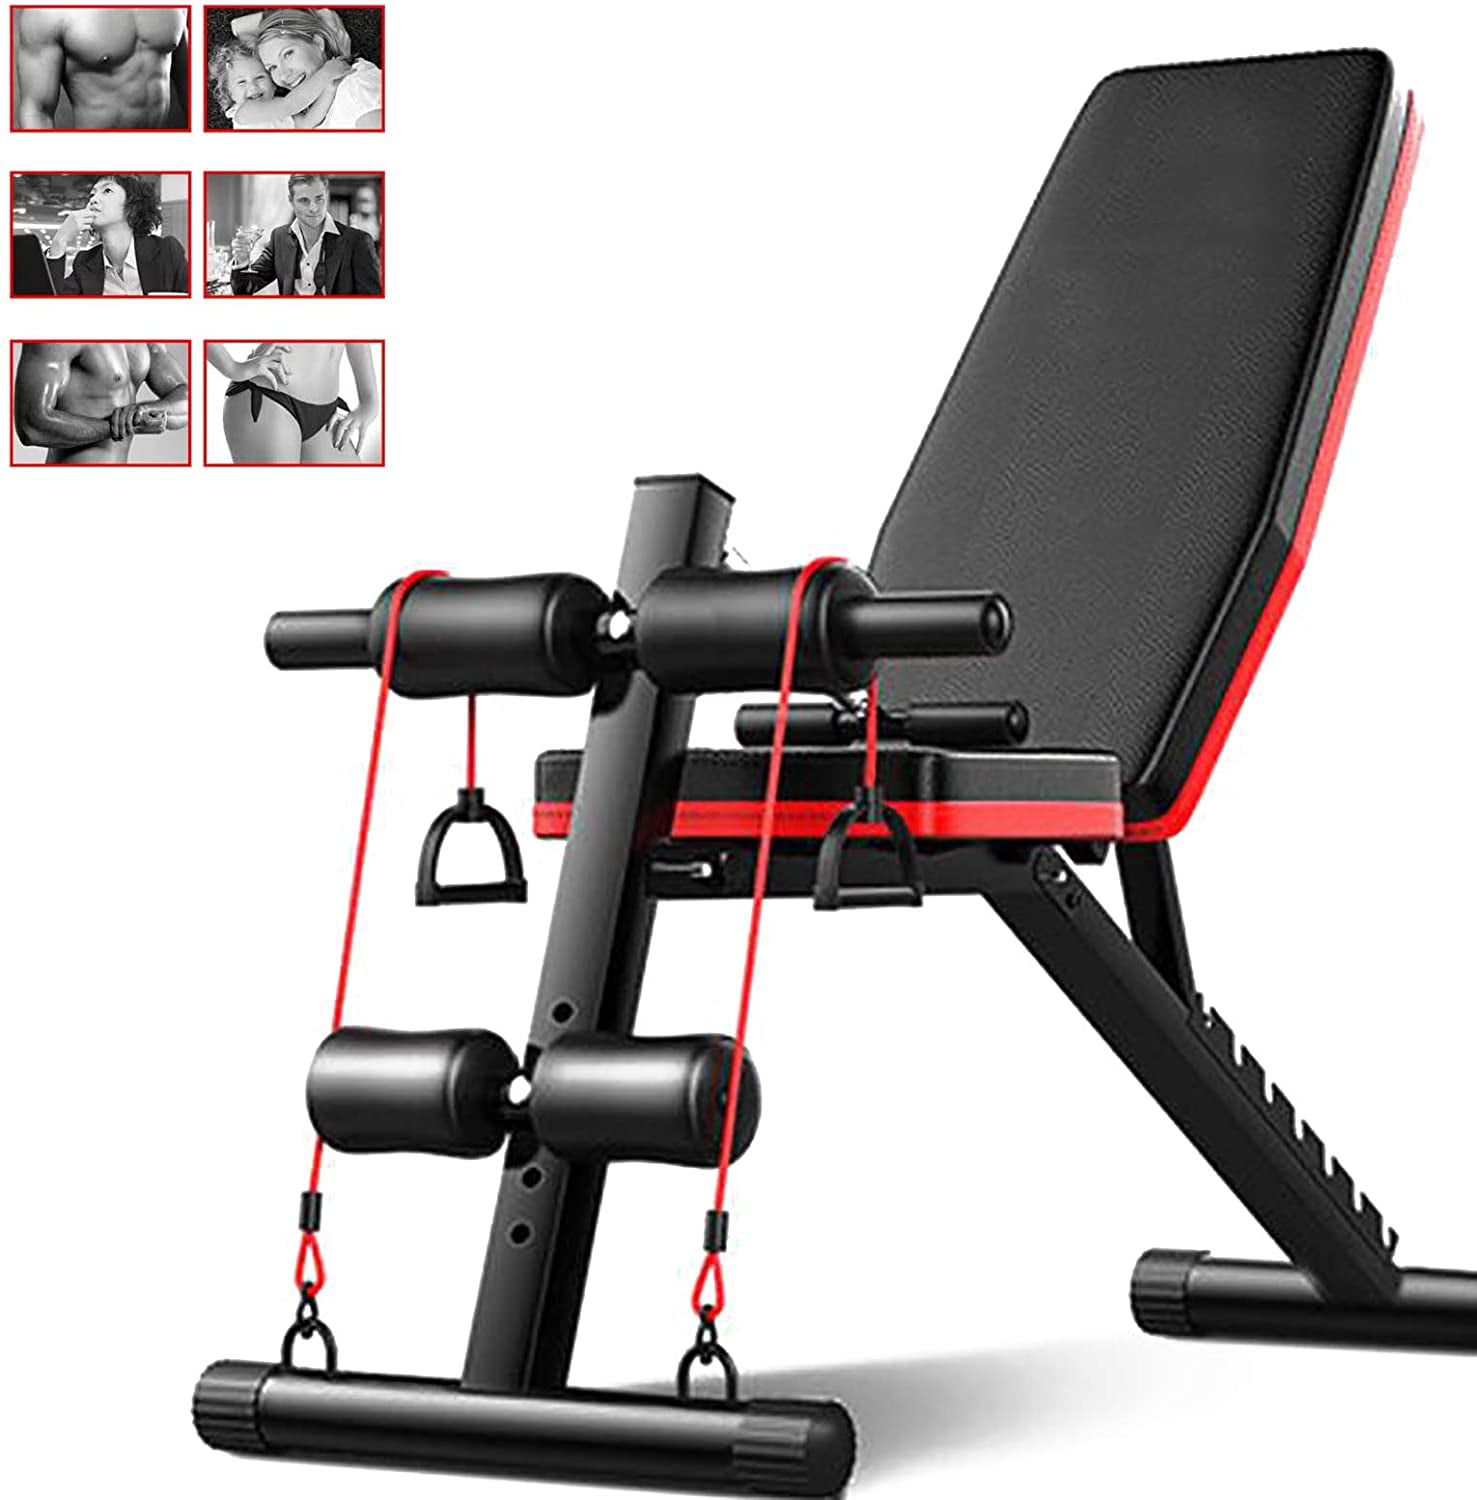 Weight Bench Adjustable Benches Foldable Workout Bench Sit Up Abs Benchs Flat Press Full Body Training Workout Bench Multifunctional Exercise Equipment for Home Gym 